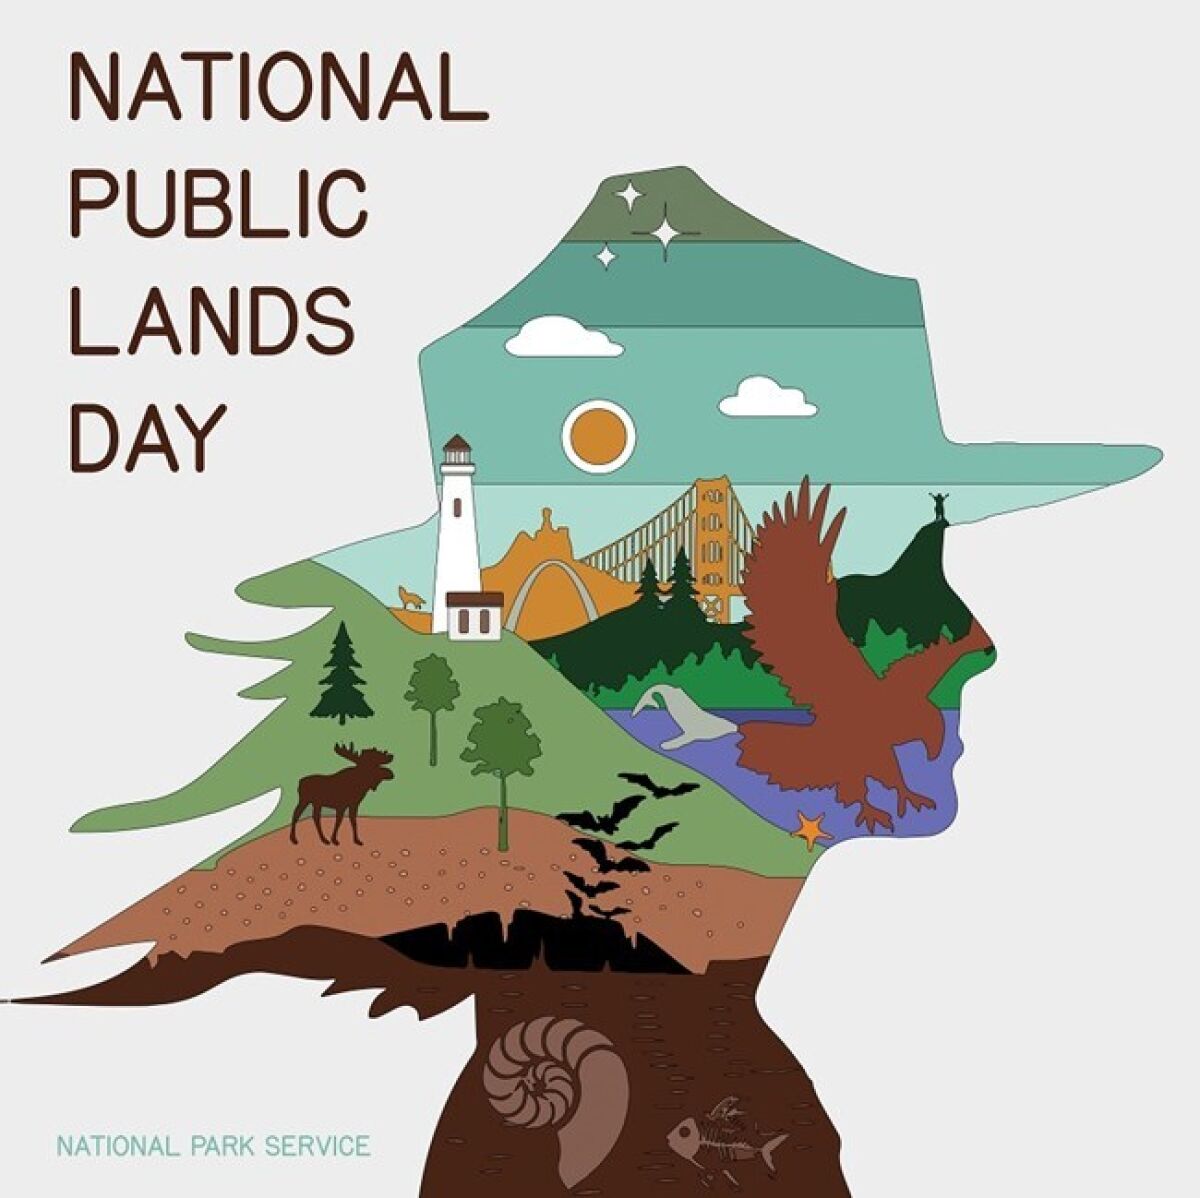 Illustrated poster promoting National Public Lands Day.